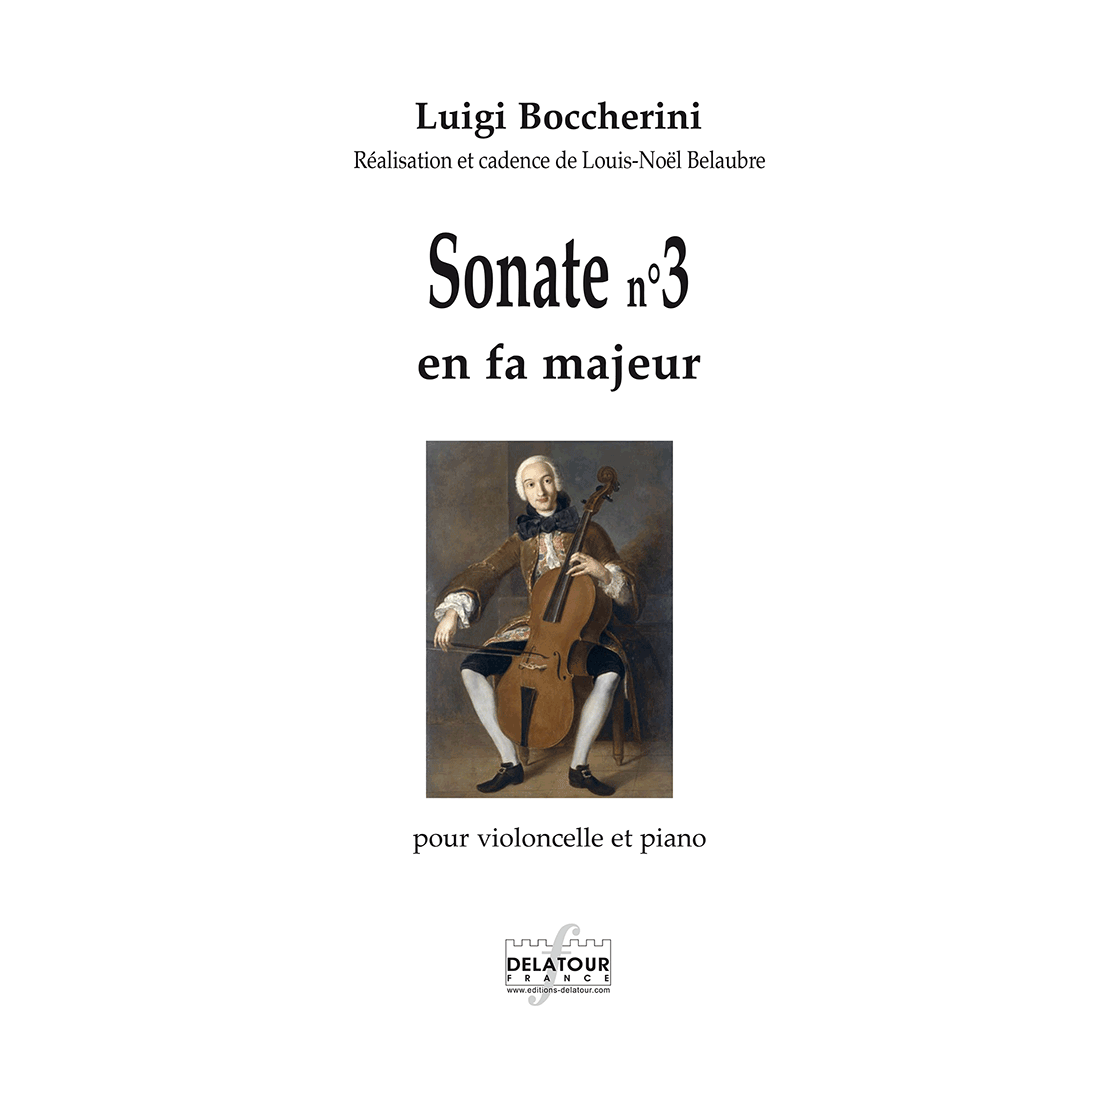 Sonate n°3 en fa majeur for cello and piano